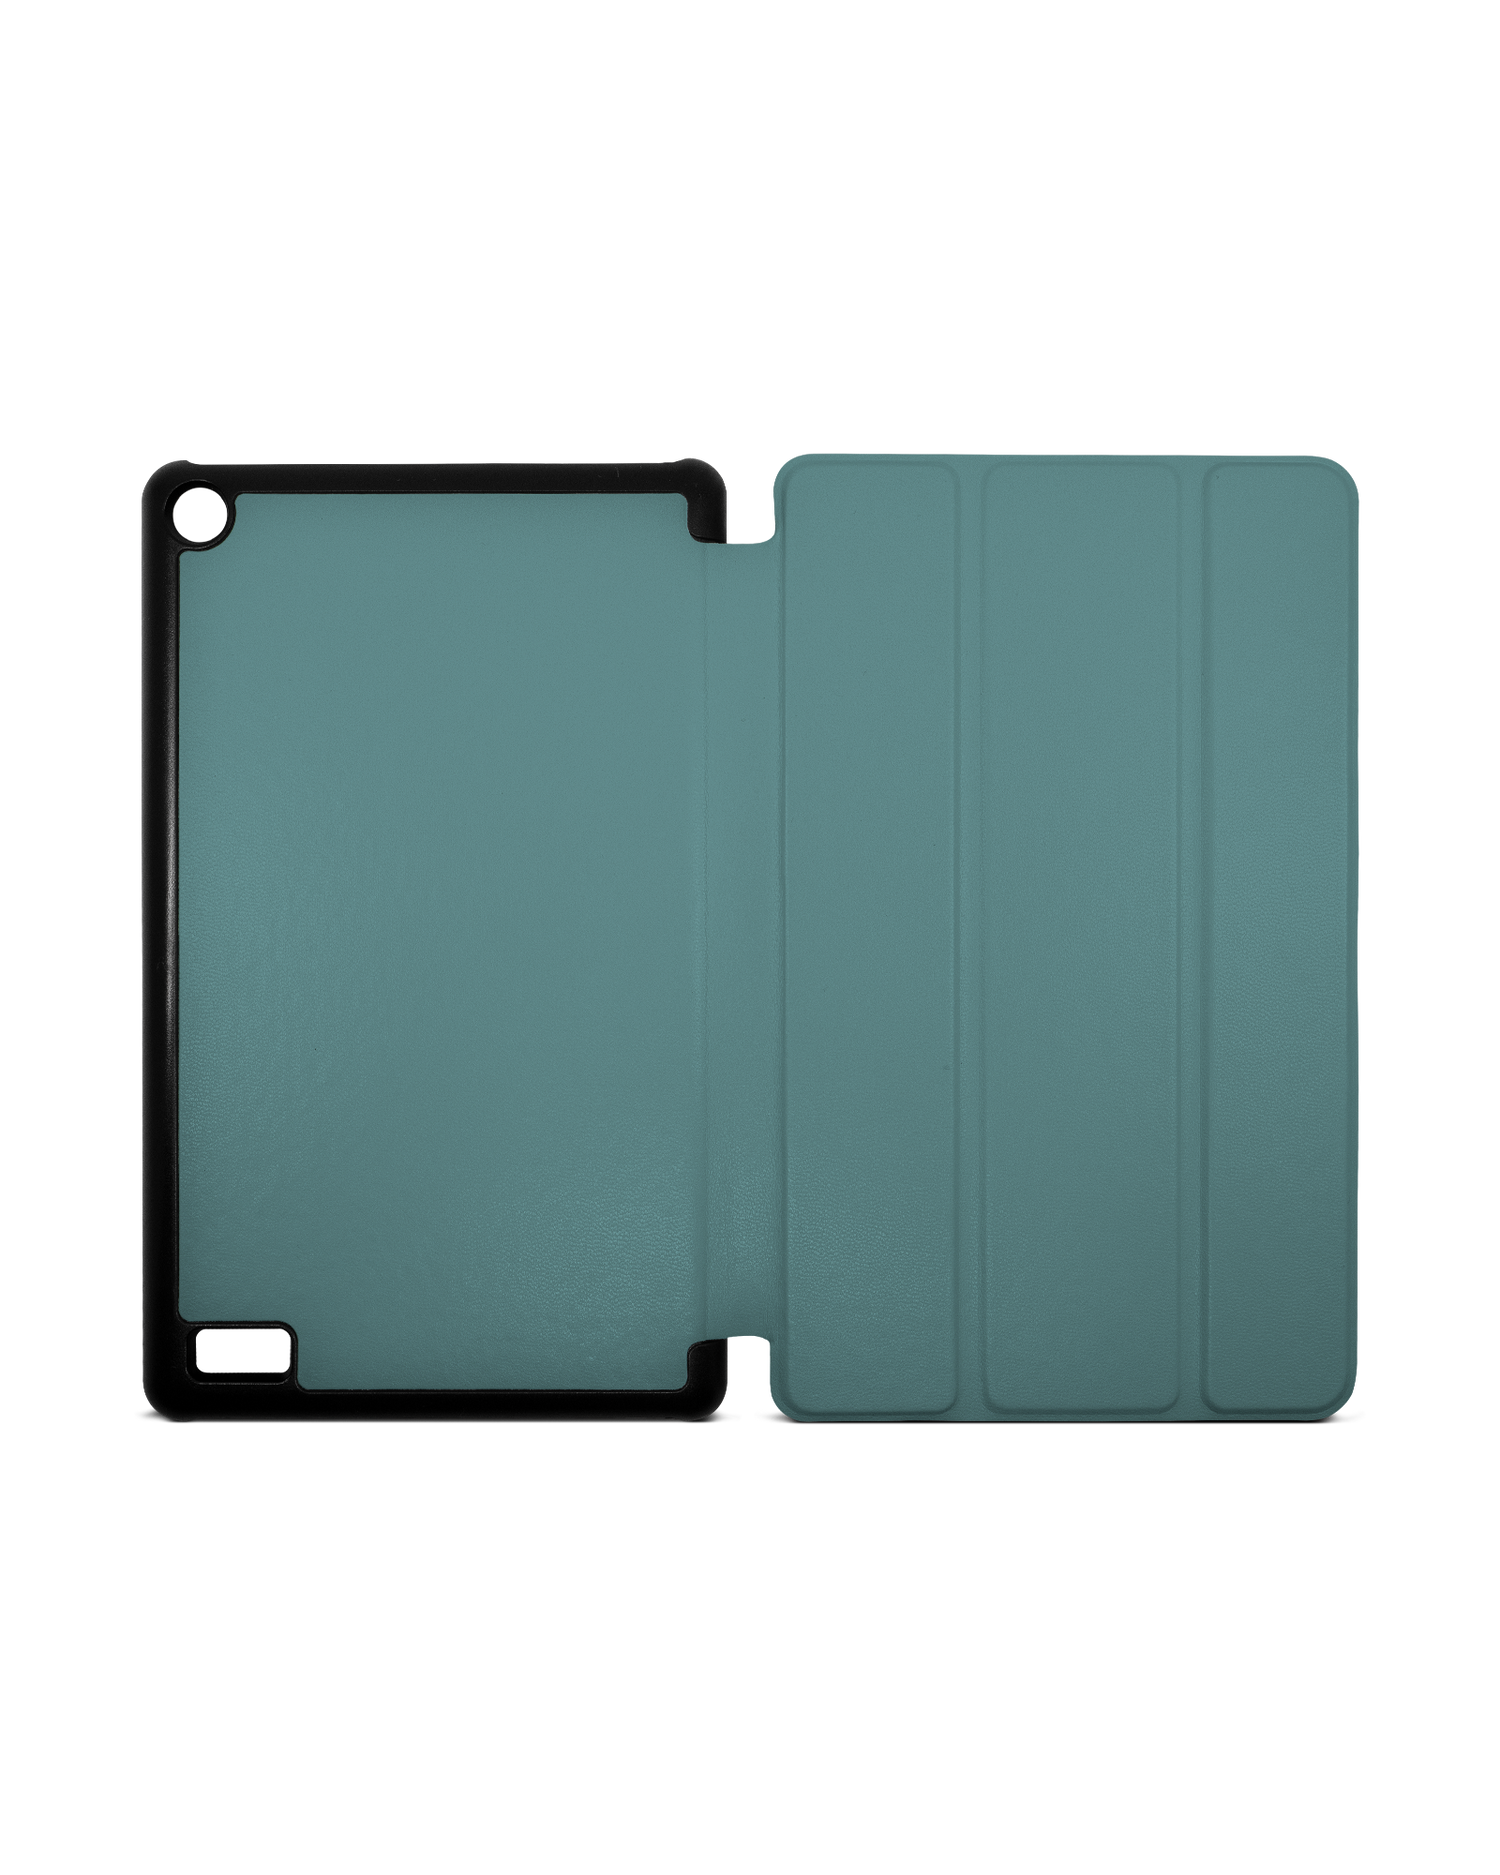 TURQUOISE Tablet Smart Case for Amazon Fire 7: Opened